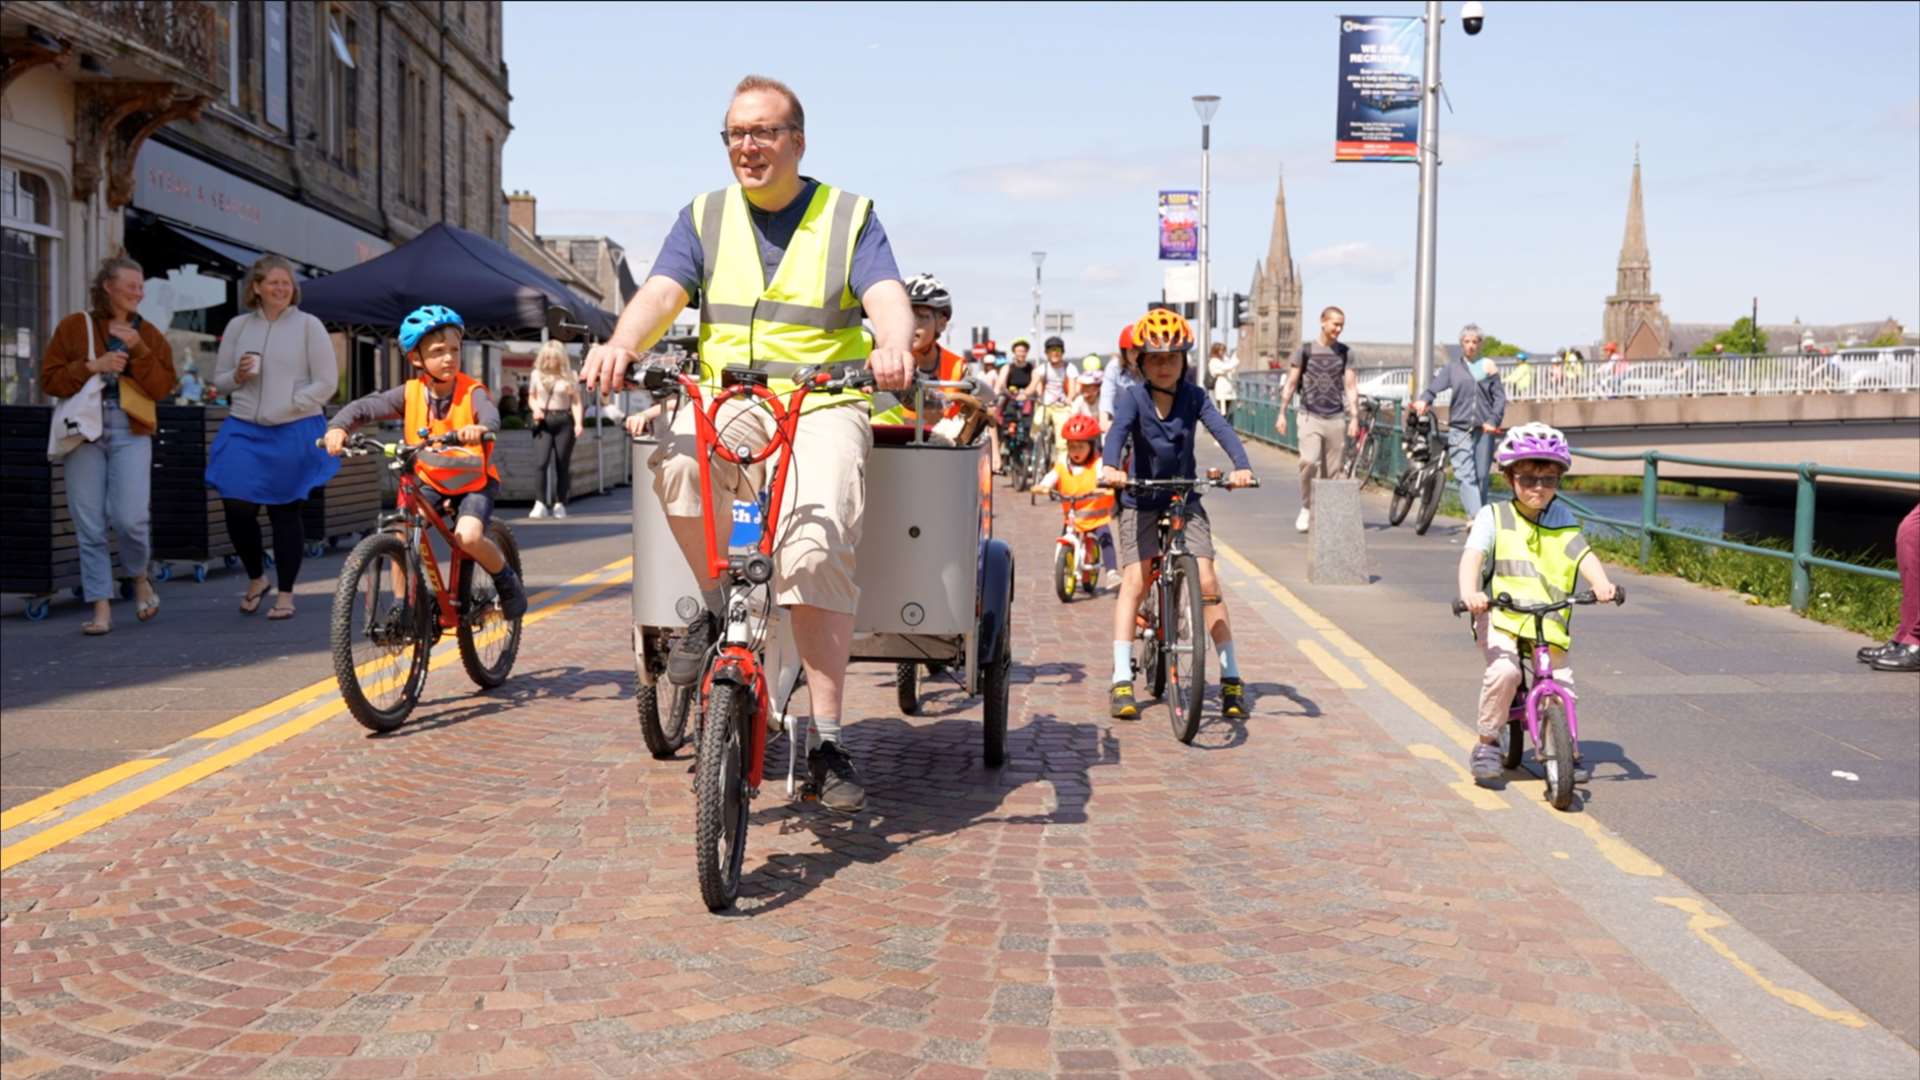 A ride by Inverness's Kidical Mass group features in the new film.